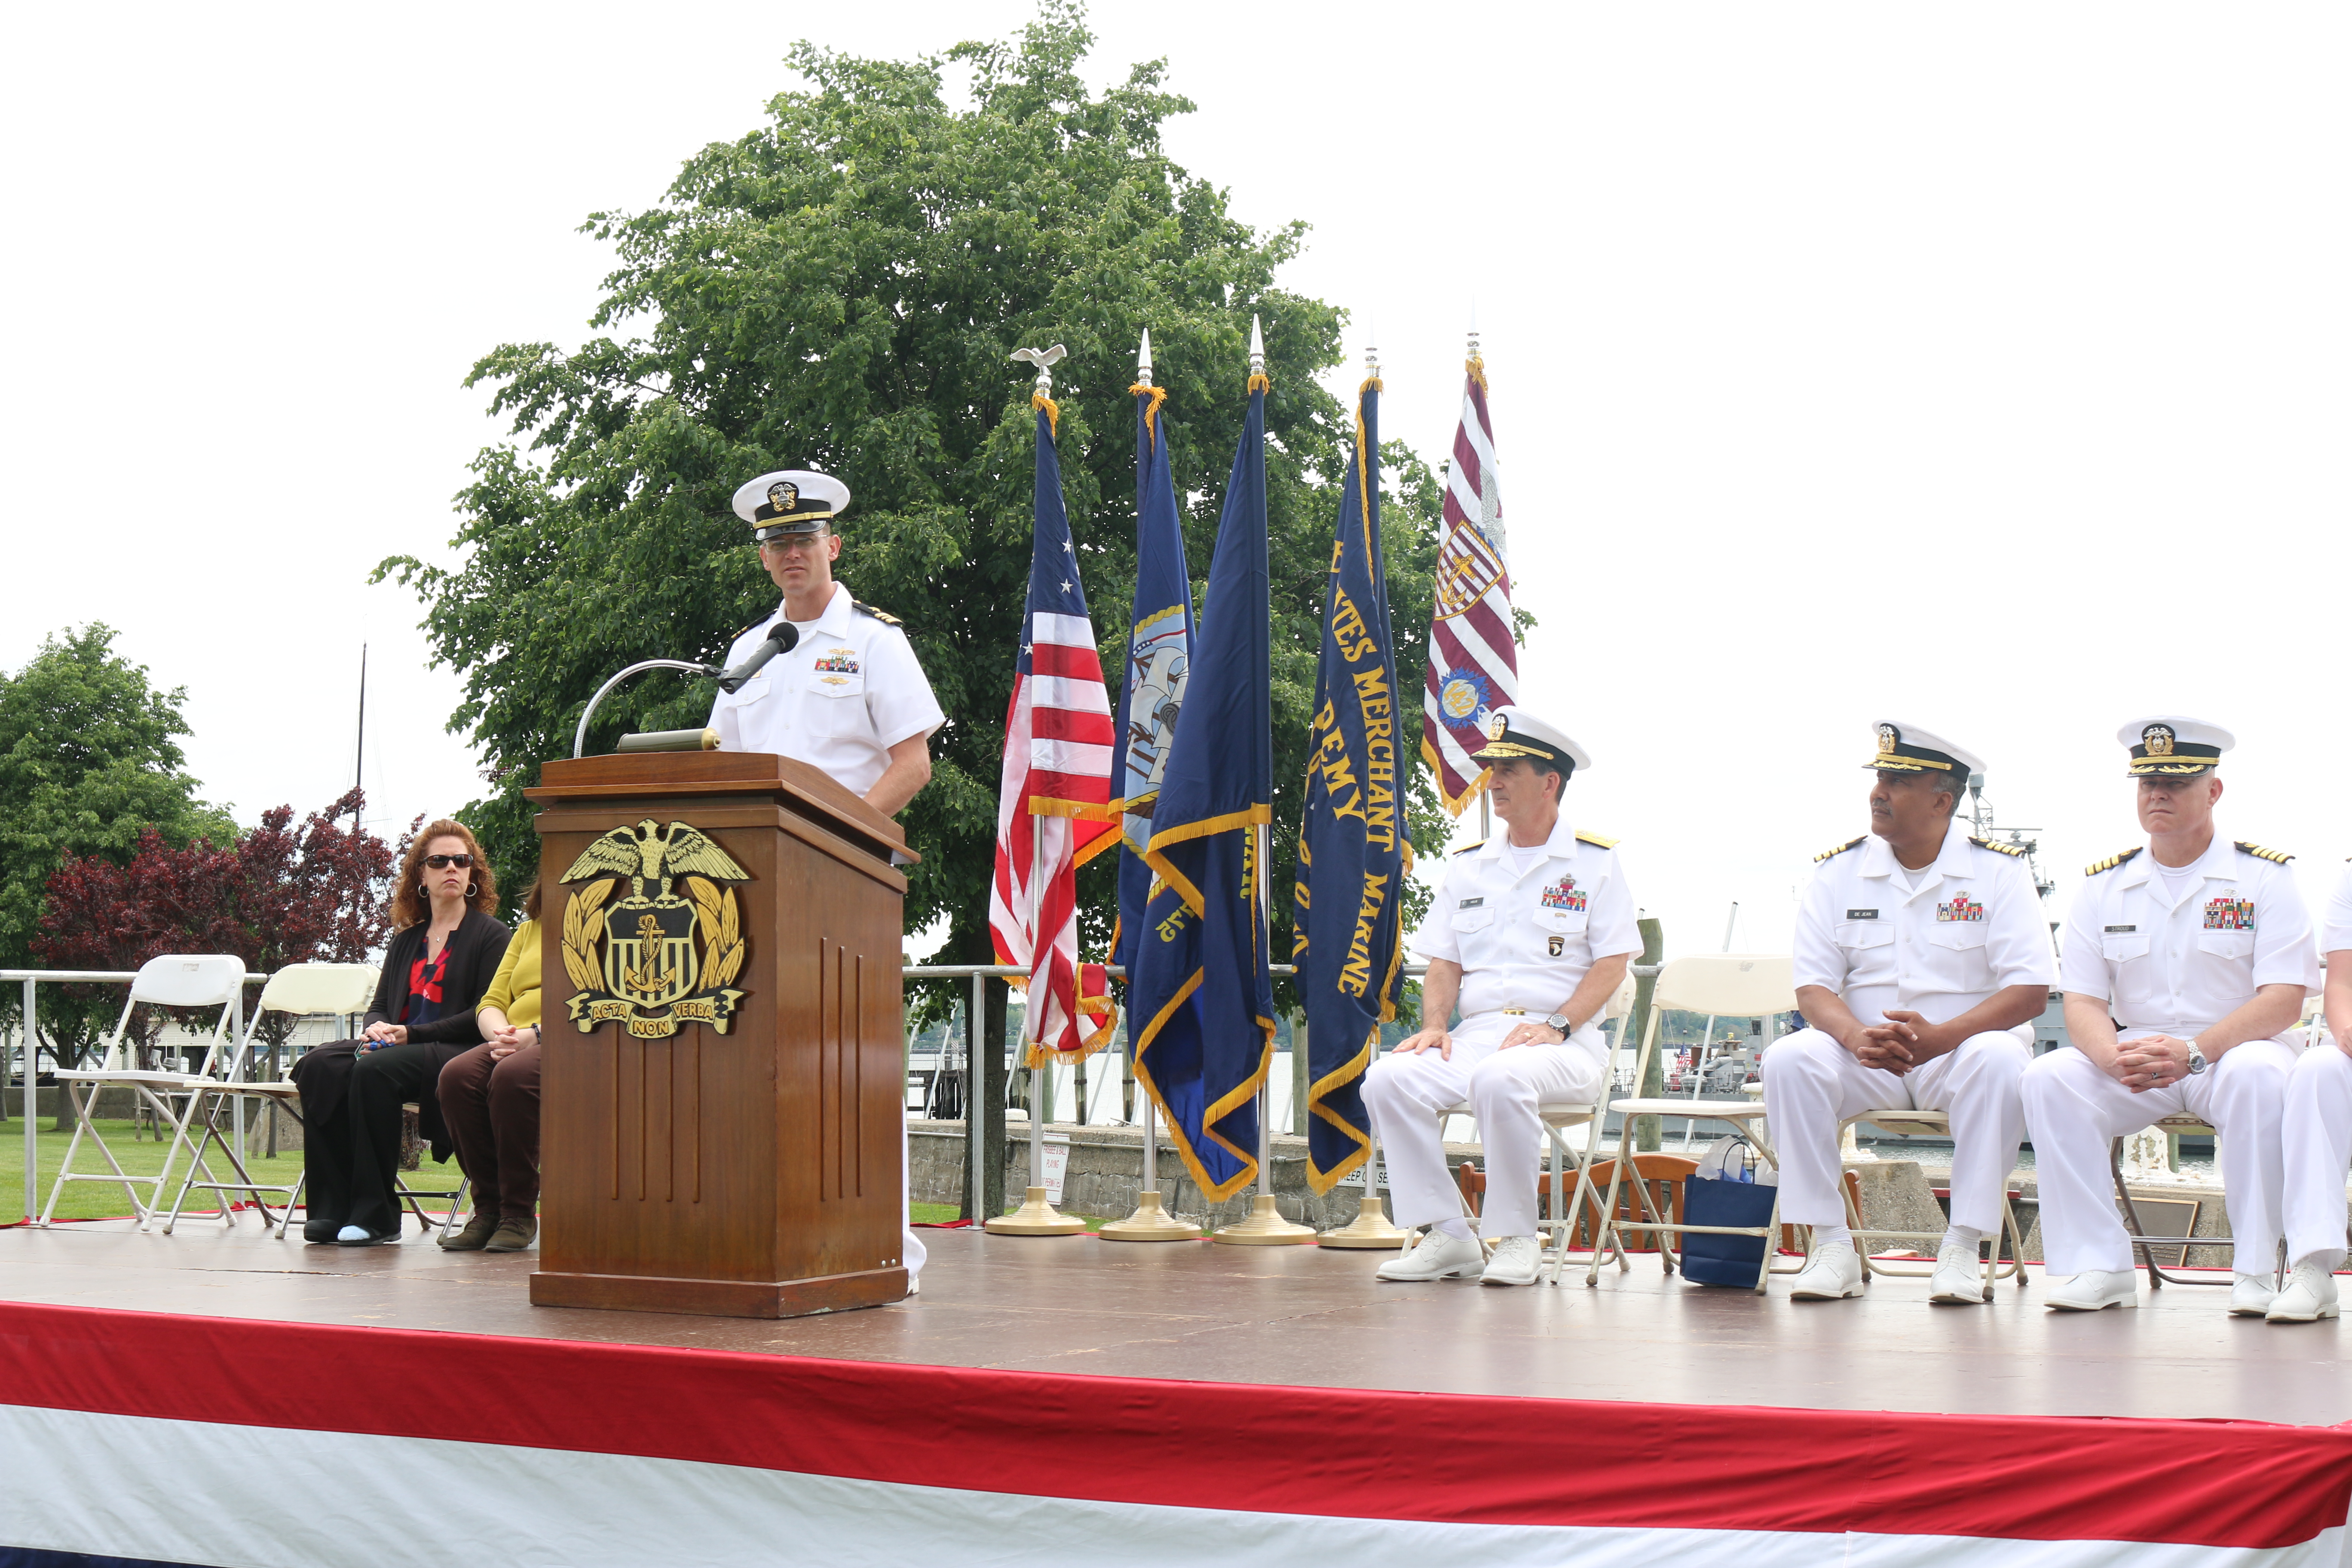 LCDR Cameron Ingram, '04, Commanding Officer of the USS Zephry addresses the Academy Community